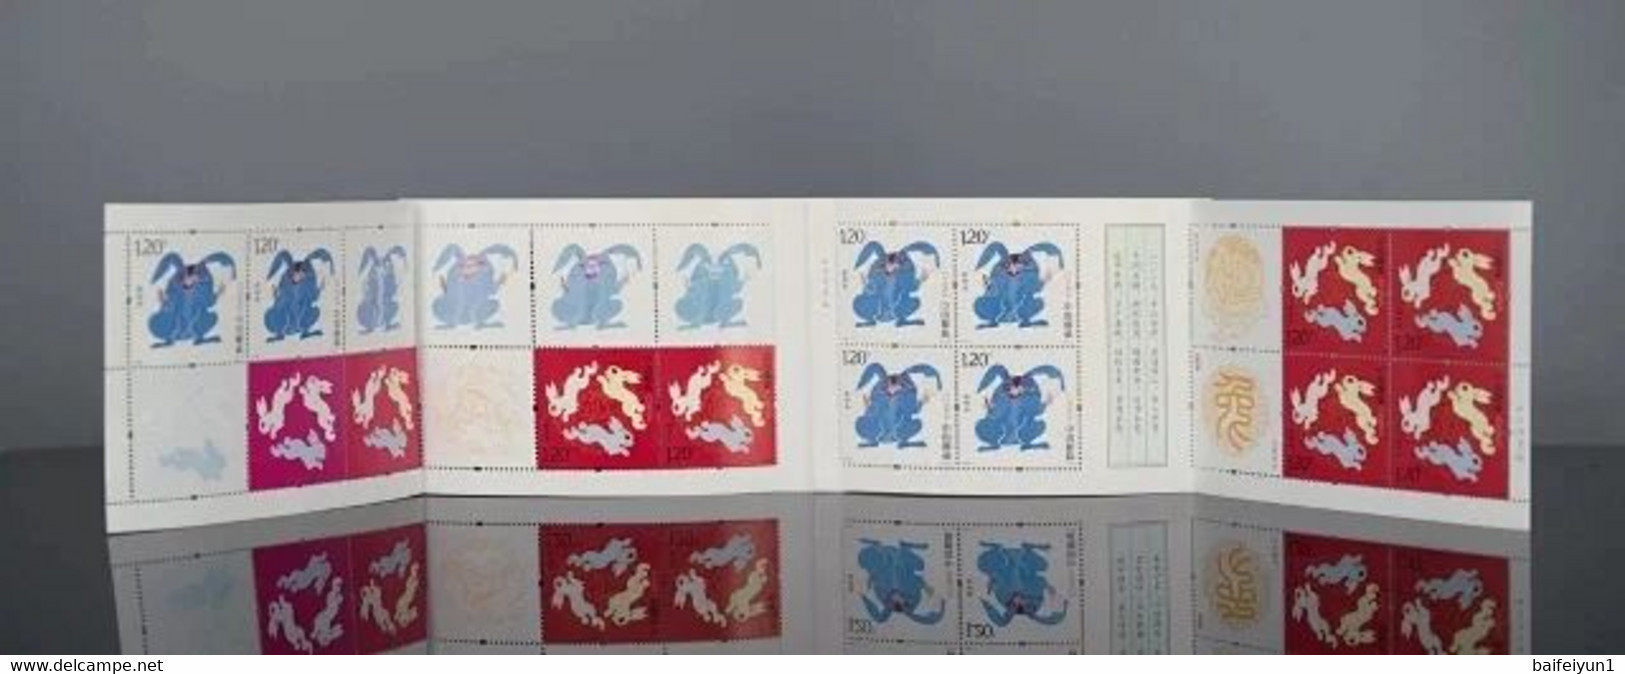 CHINA 2023-1 China New Year Zodiac Of Rabbit Stamp Booklet(Hologram Cover) - Hologrammen